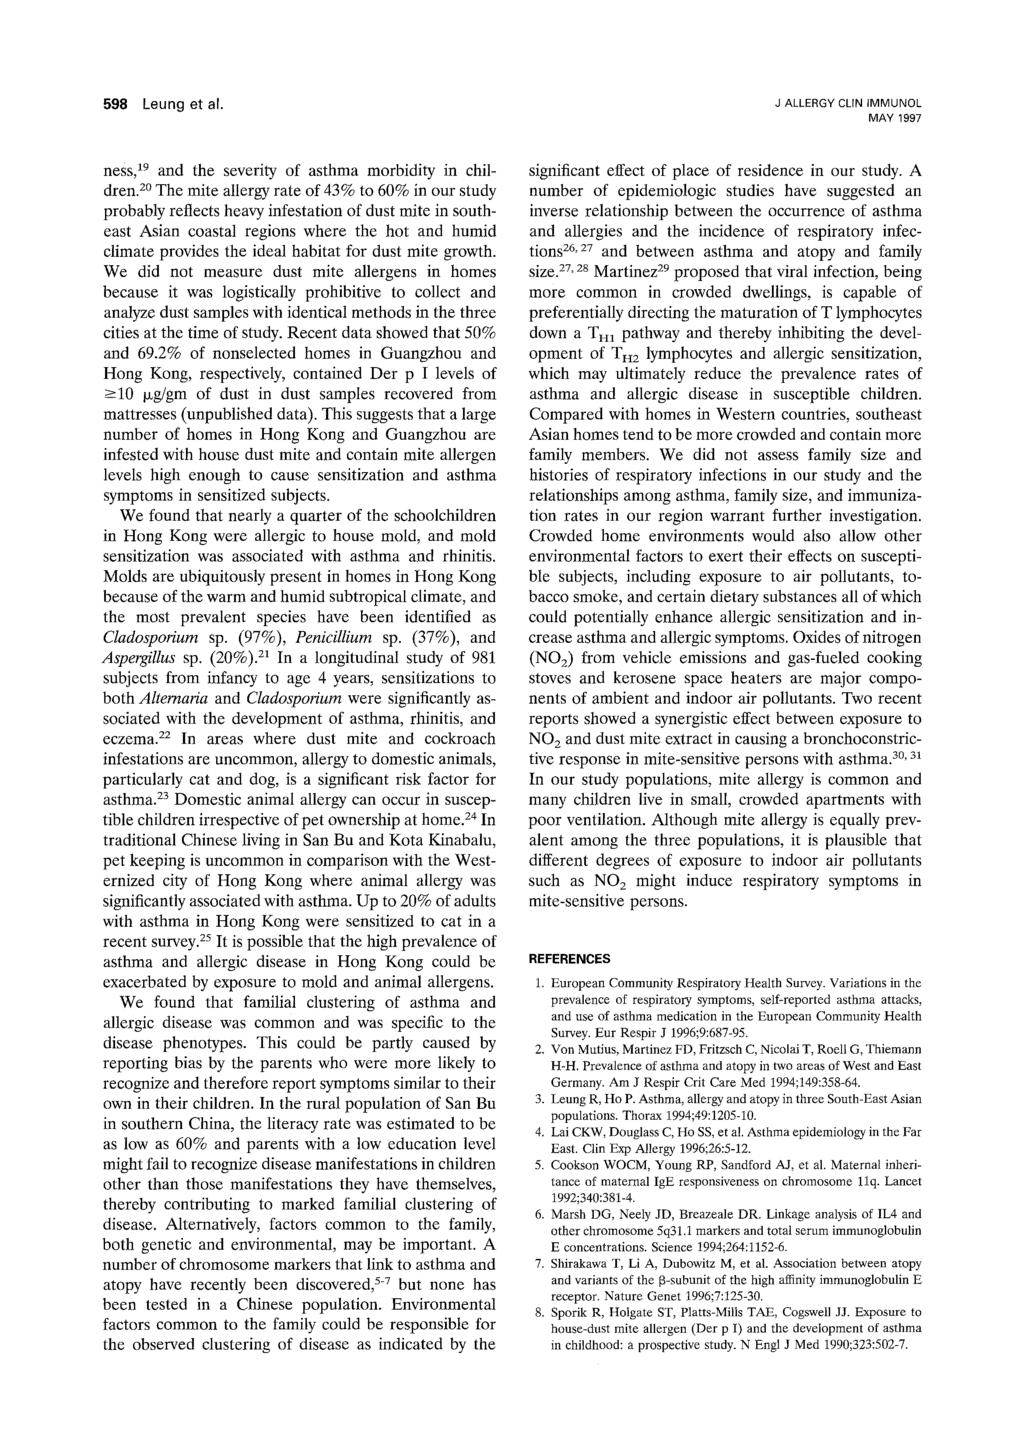 598 Leung et a[. J ALLERGY CLIN IMMUNOL MAY 1997 ness] 9 and the severity of asthma morbidity in children.